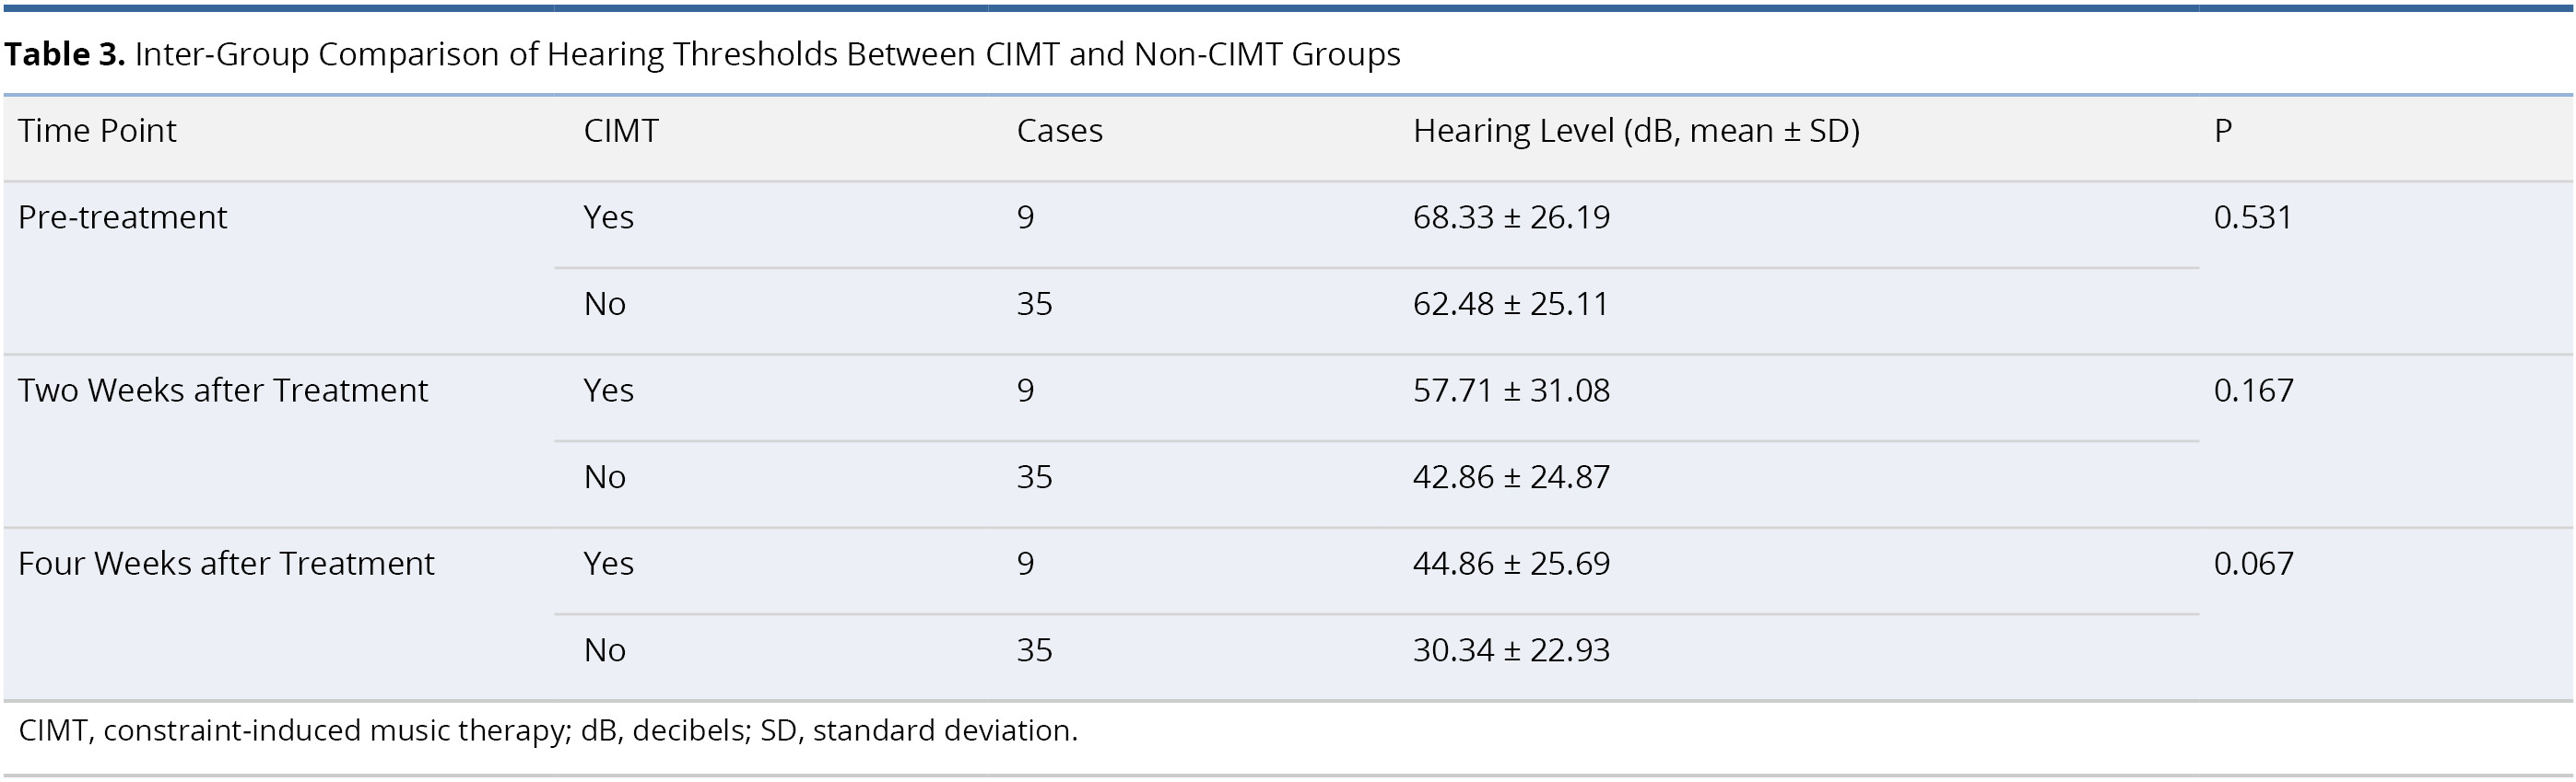 Table 3.jpgInter-Group Comparison of Hearing Thresholds Between CIMT and Non-CIMT Groups